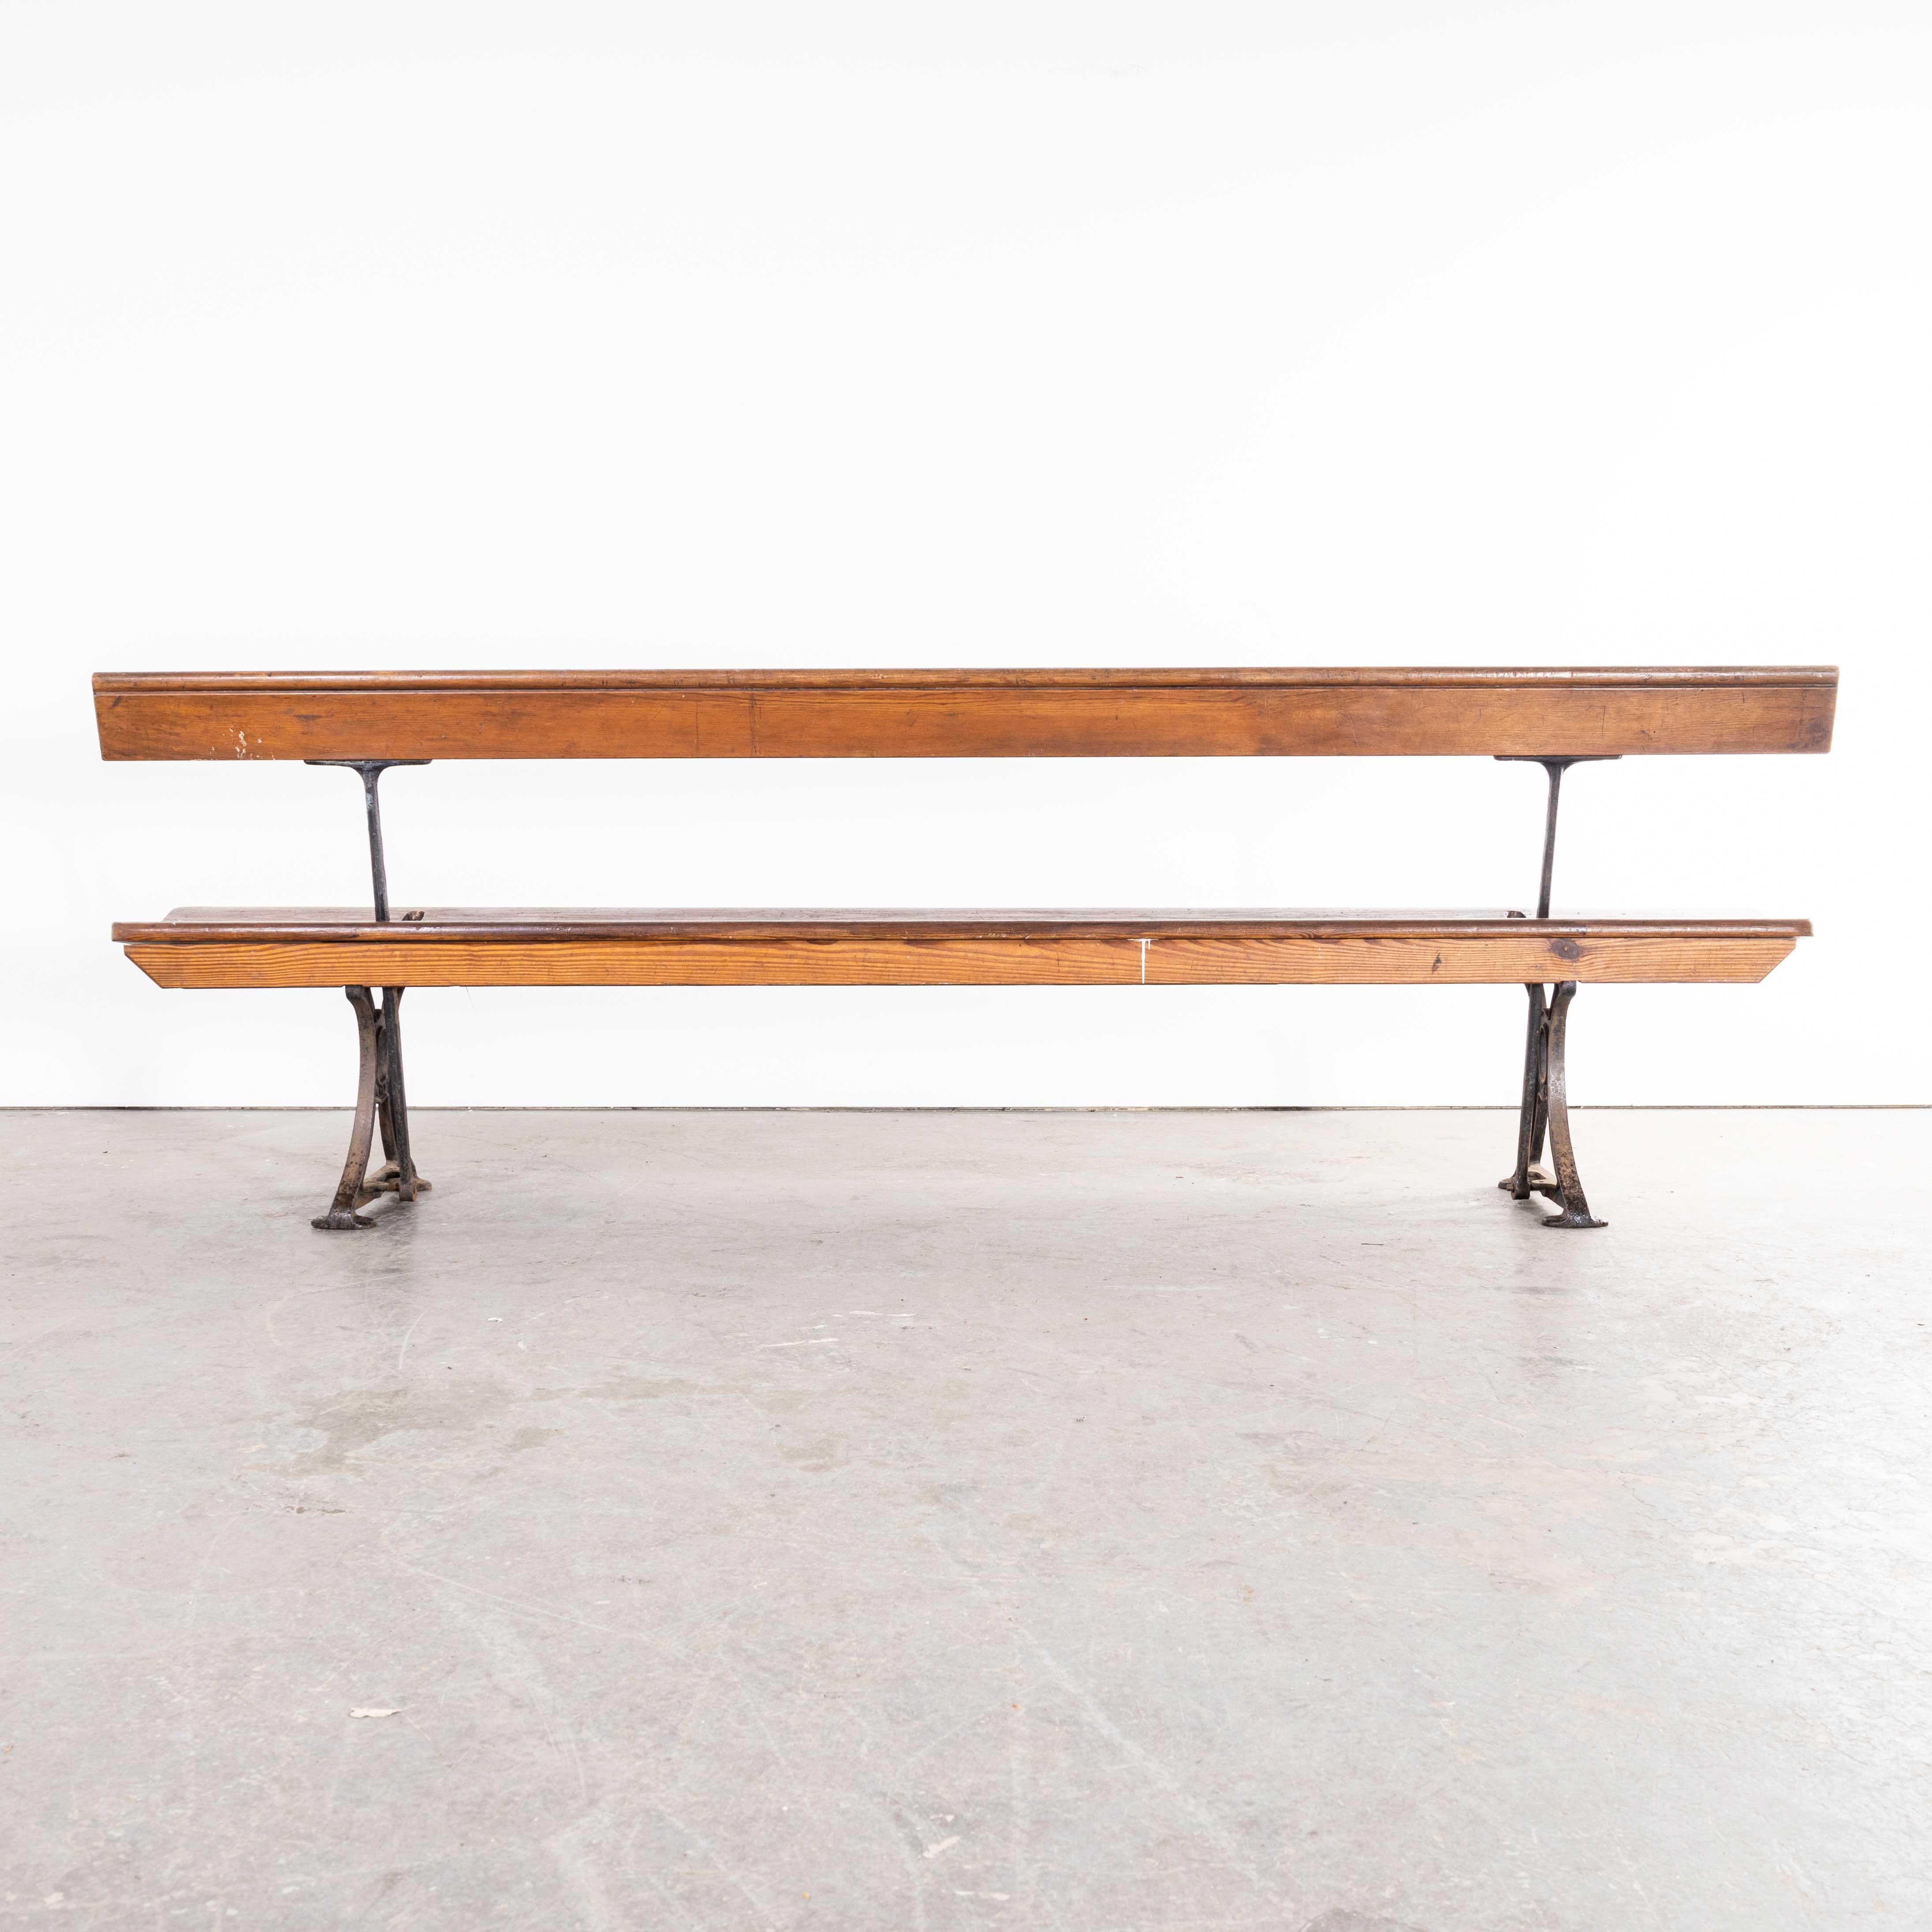 1940s Original British Station Benches – Model 2339
1940s Original British Station Benches – Model 2339. Sourced from a disused station in the midlands we have a number of these very original benches available. The benches feature heavy cast metal